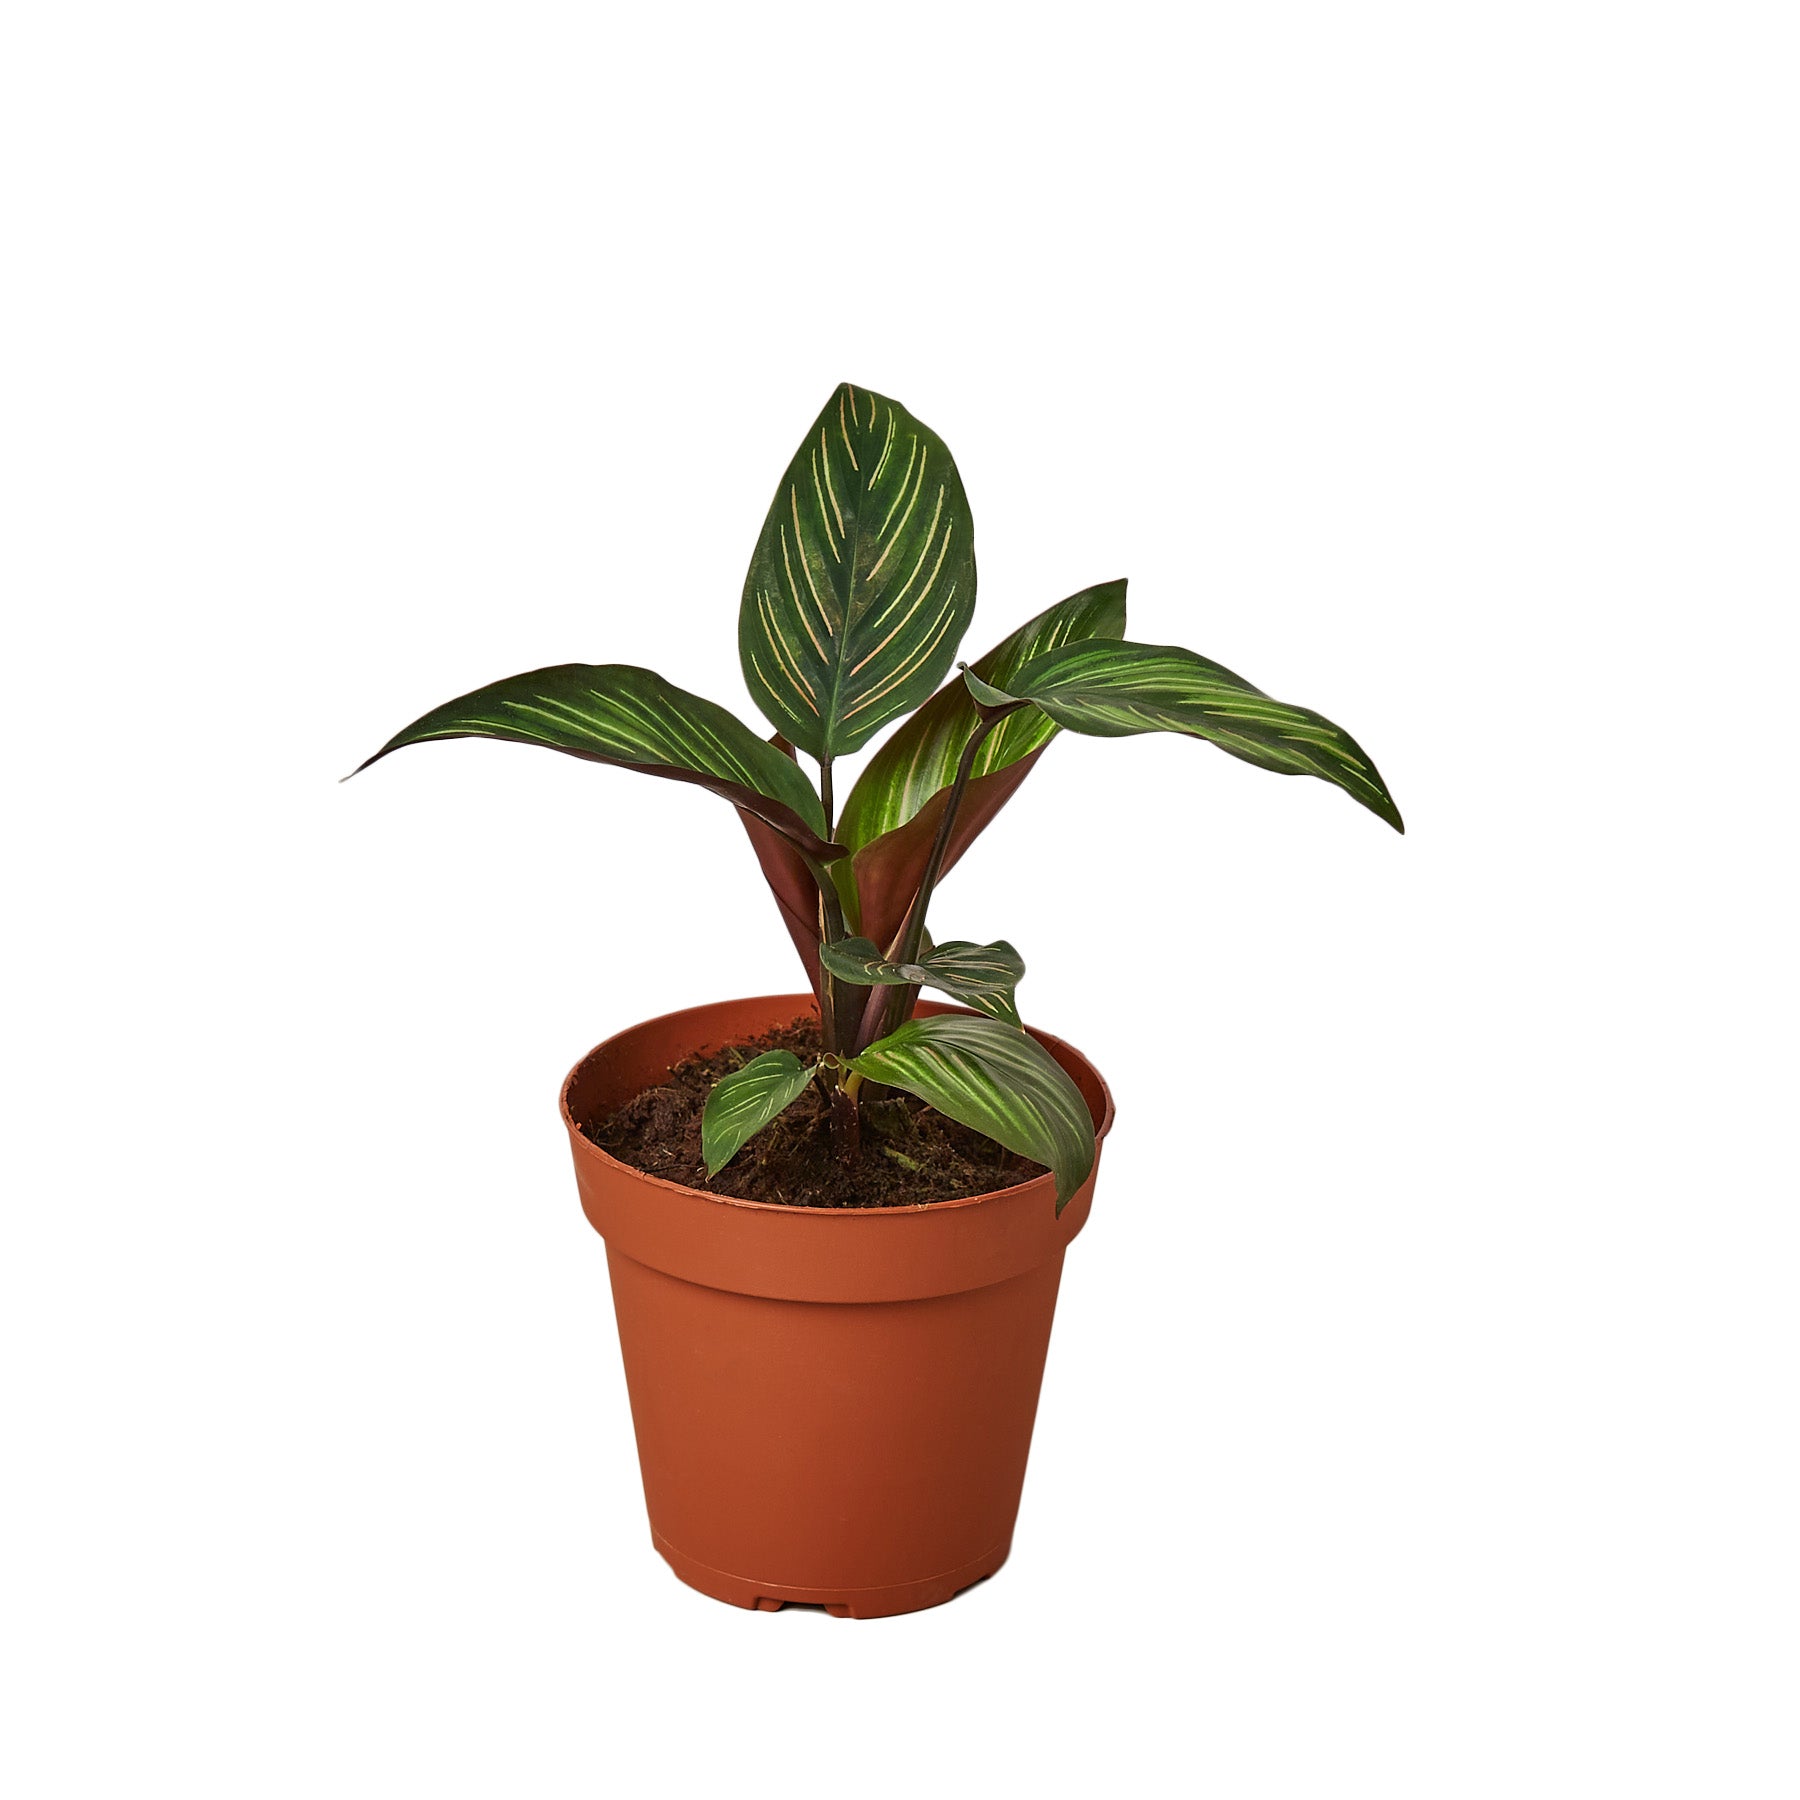 A small plant in a pot on a white background at a garden center.